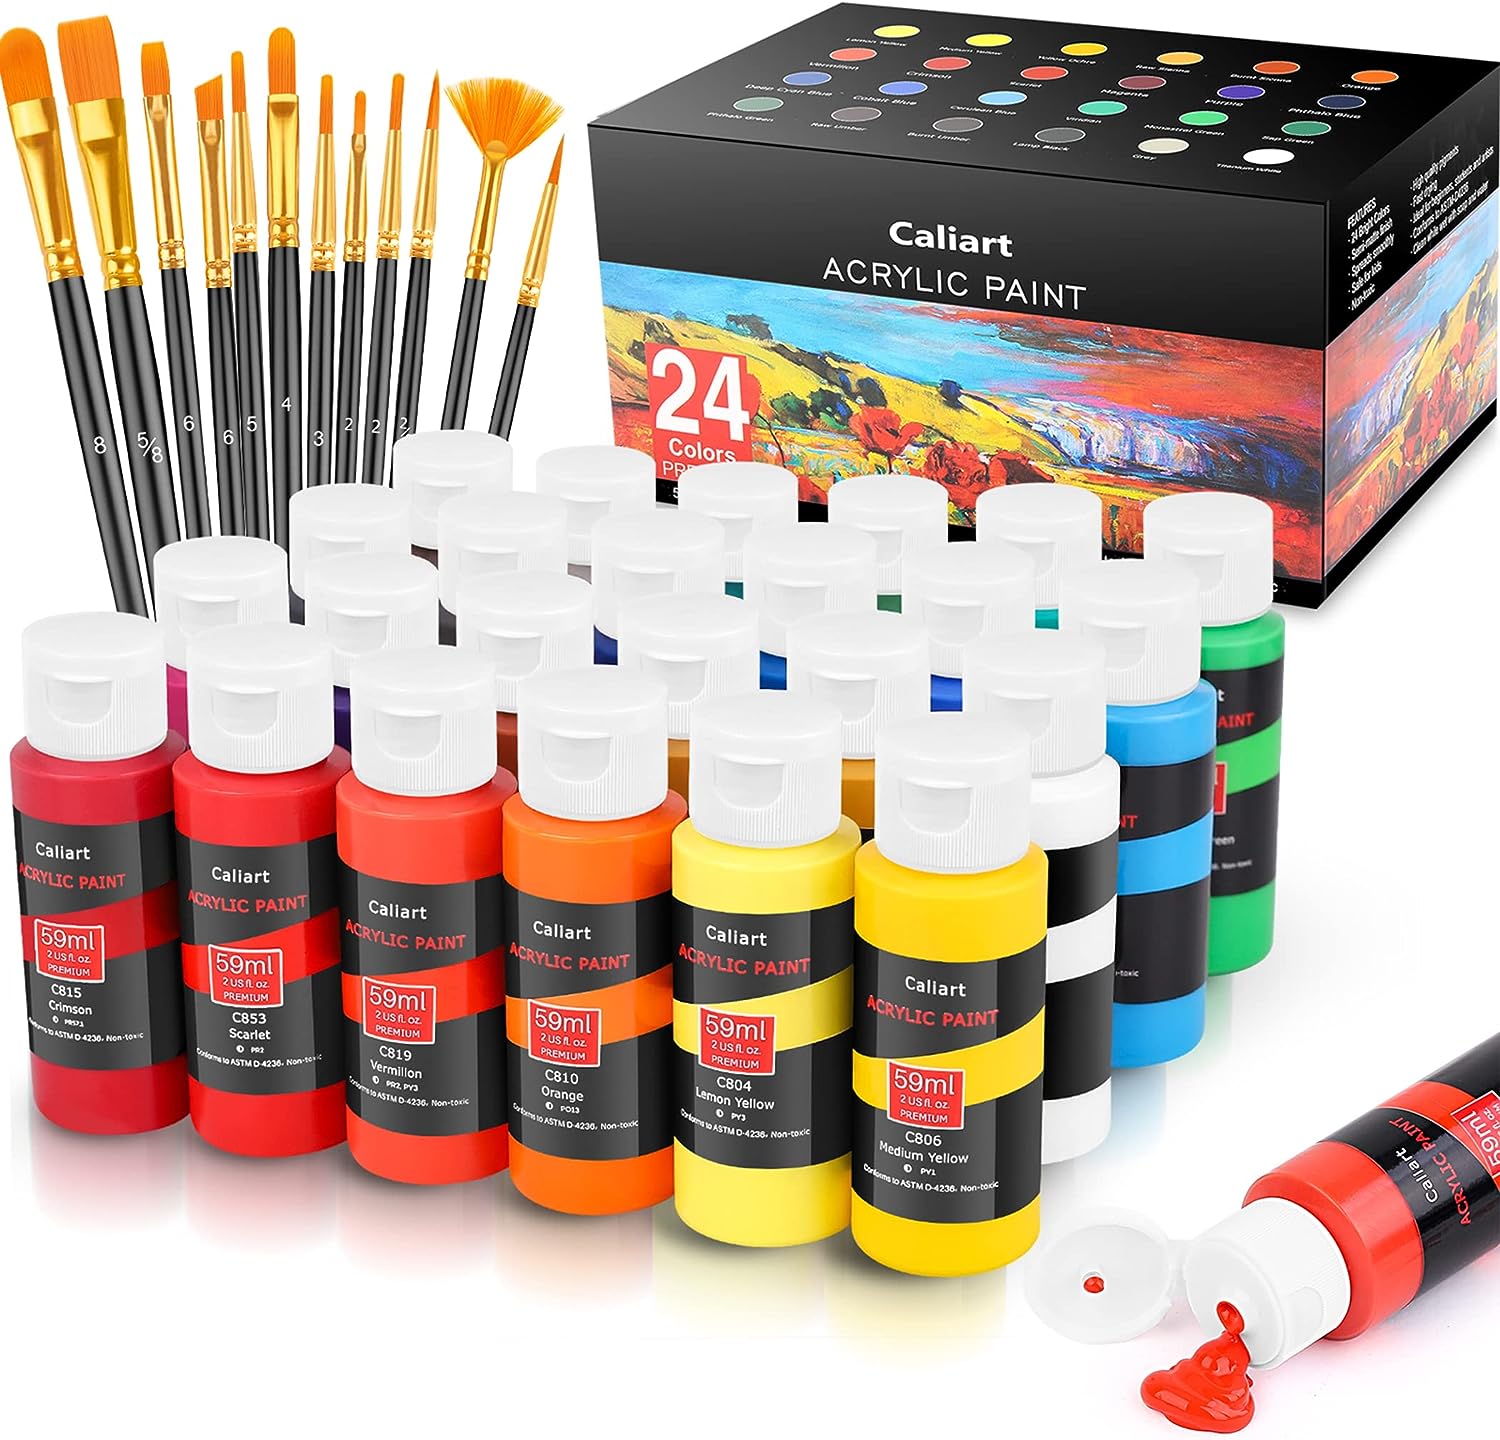 Caliart Acrylic Paint Set With 12 Brushes, 24 Colors (59ml, 2oz) Art Craft Paints Gifts for Artists Kids Beginners & Painters, Halloween Pumpkin Canvas.